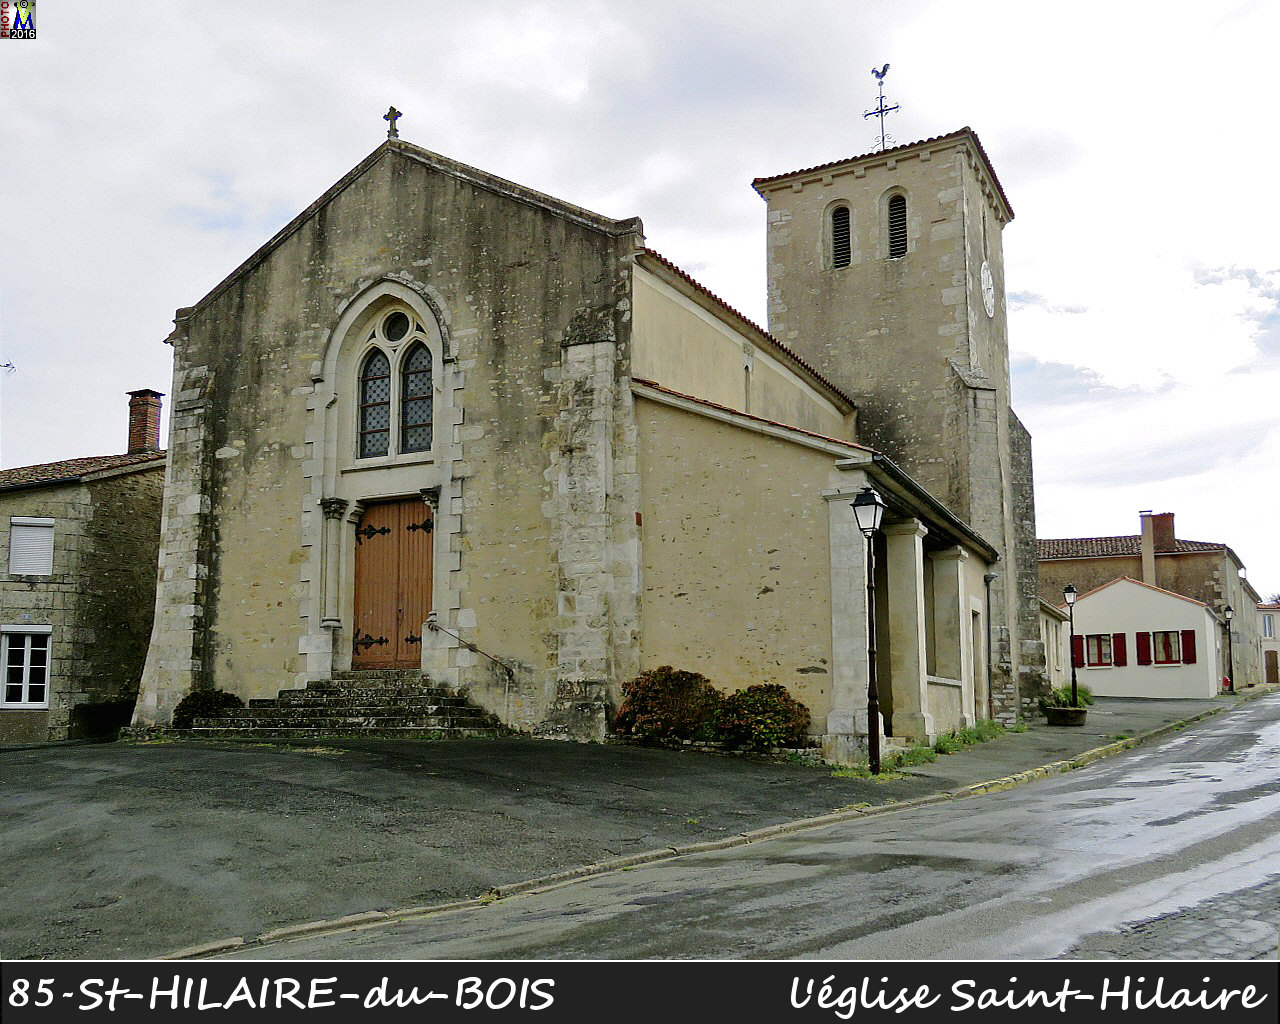 85CAILLERE-StHILAIRE-HILAIRE_eglise_1000.jpg